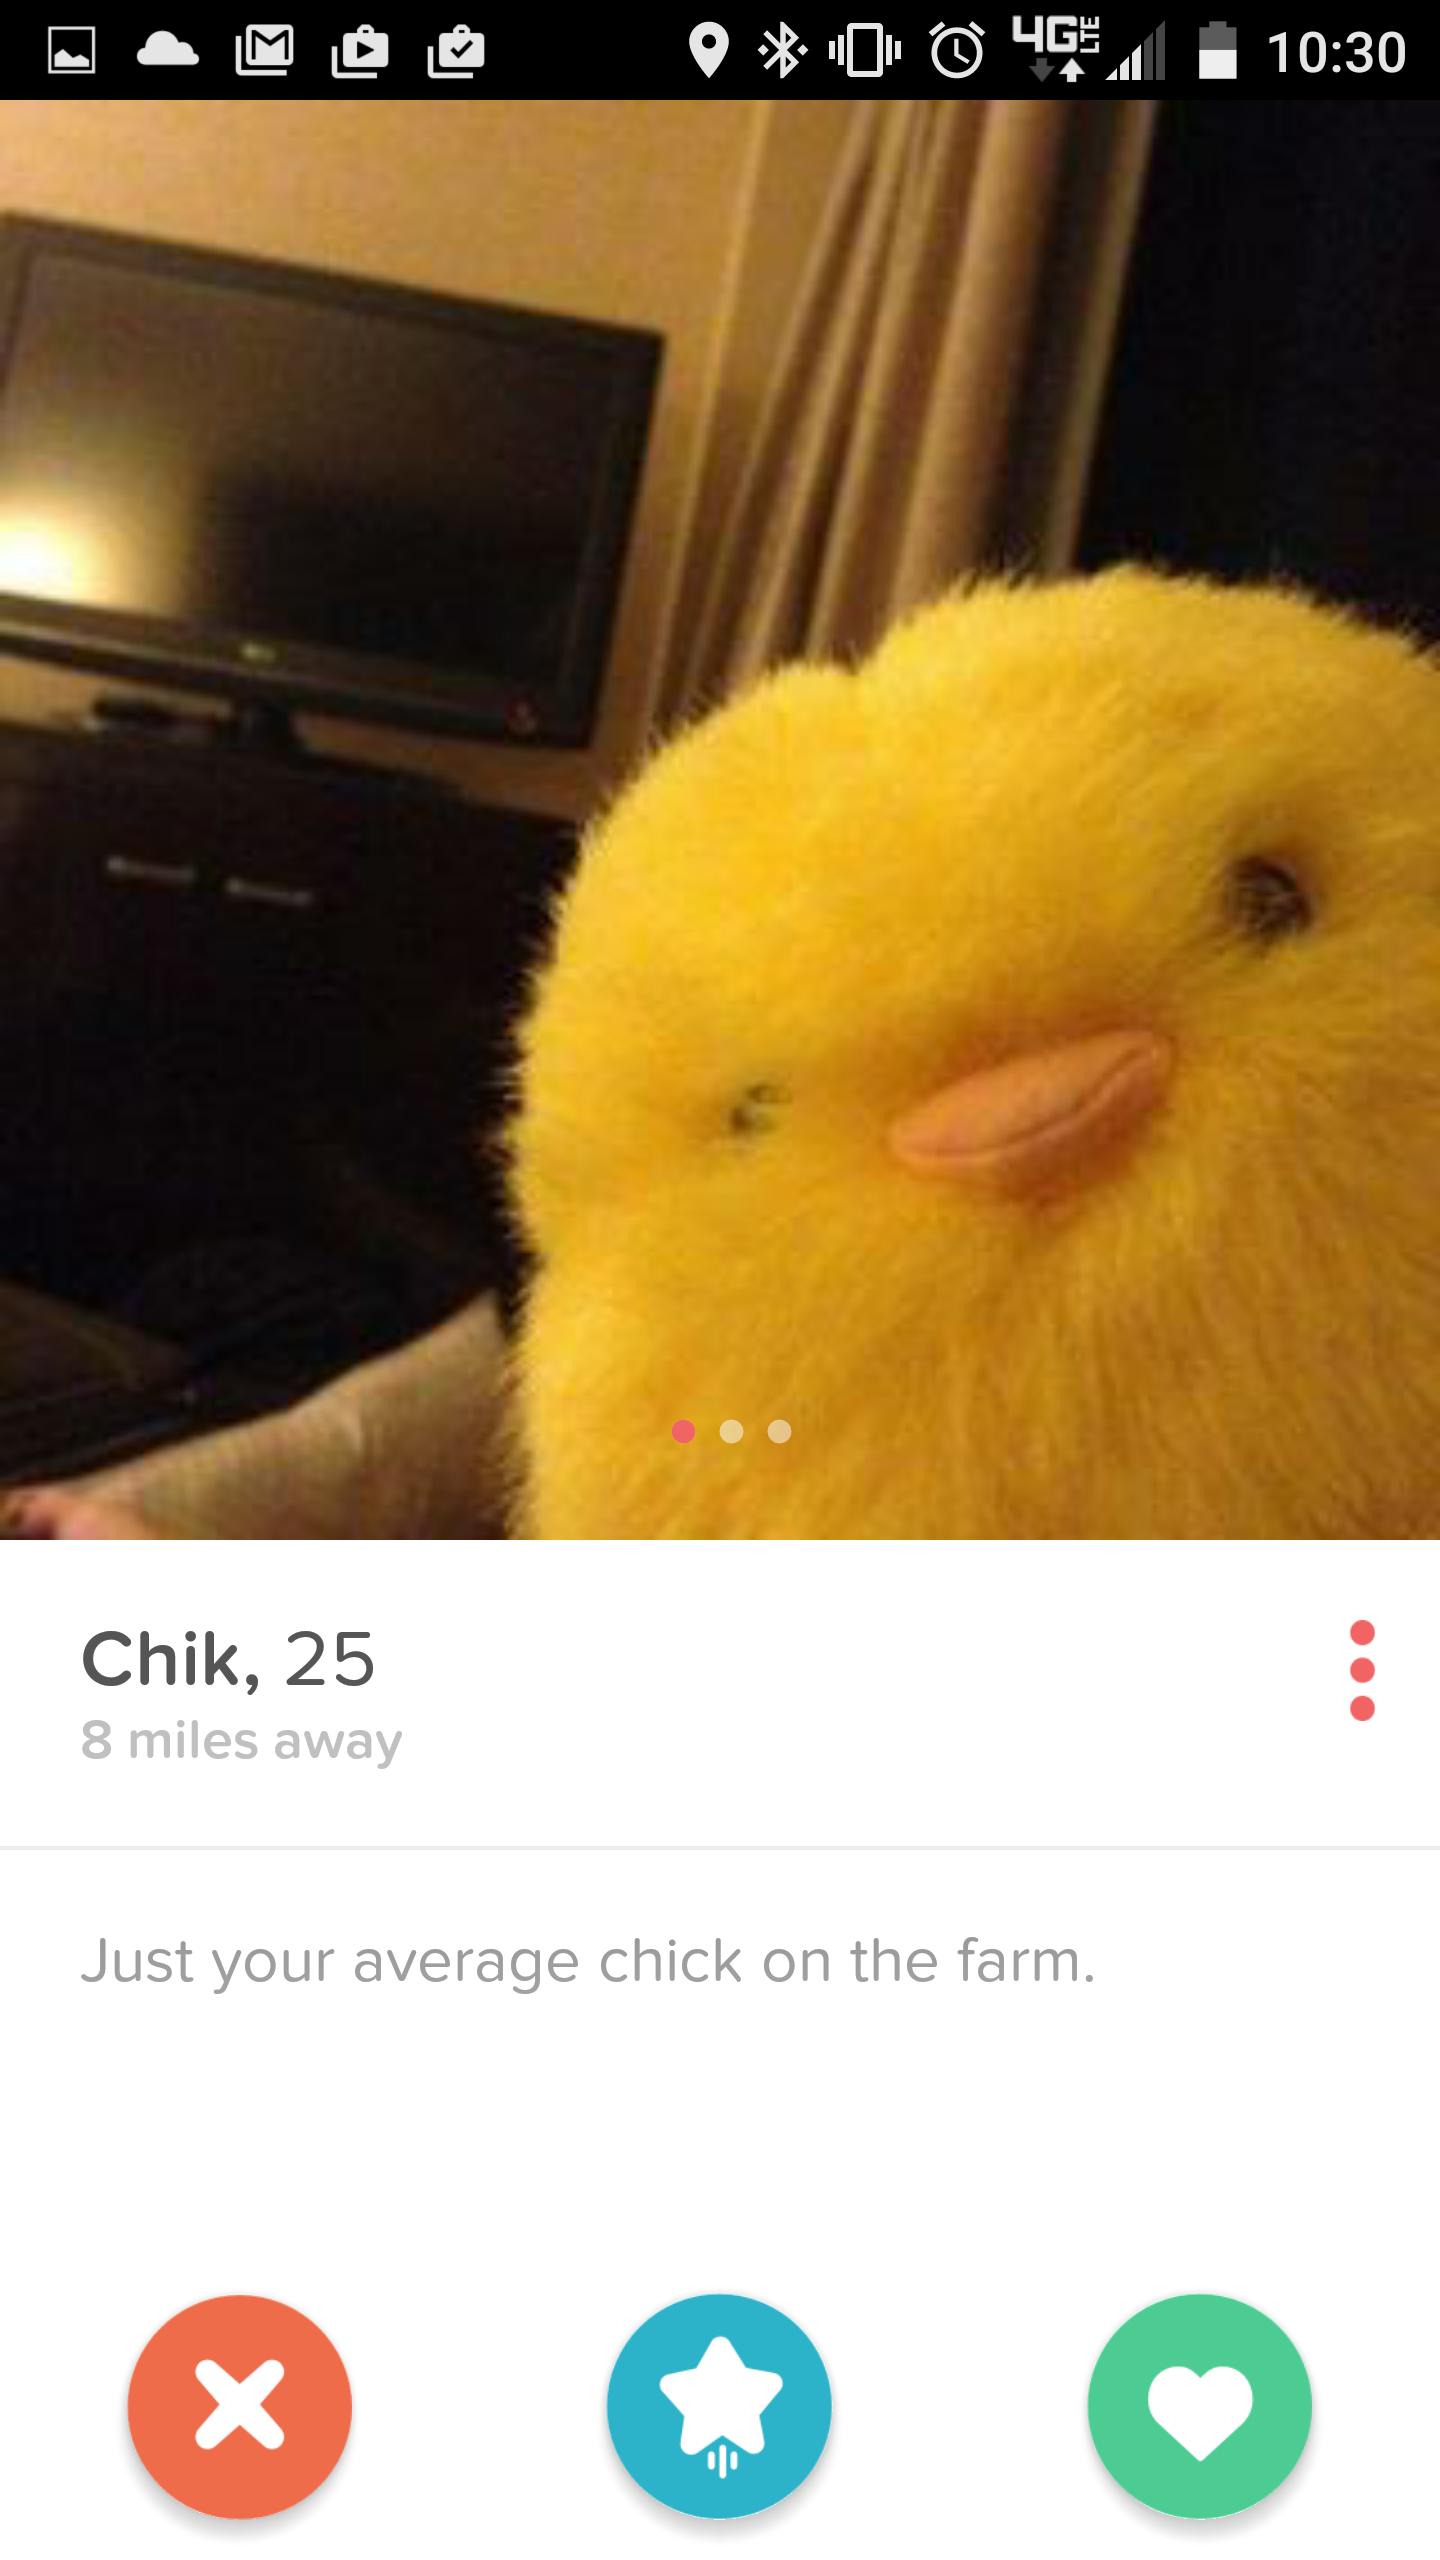 hot tinder girls - 00 46 Chik, 25 8 miles away Just your average chick on the farm.